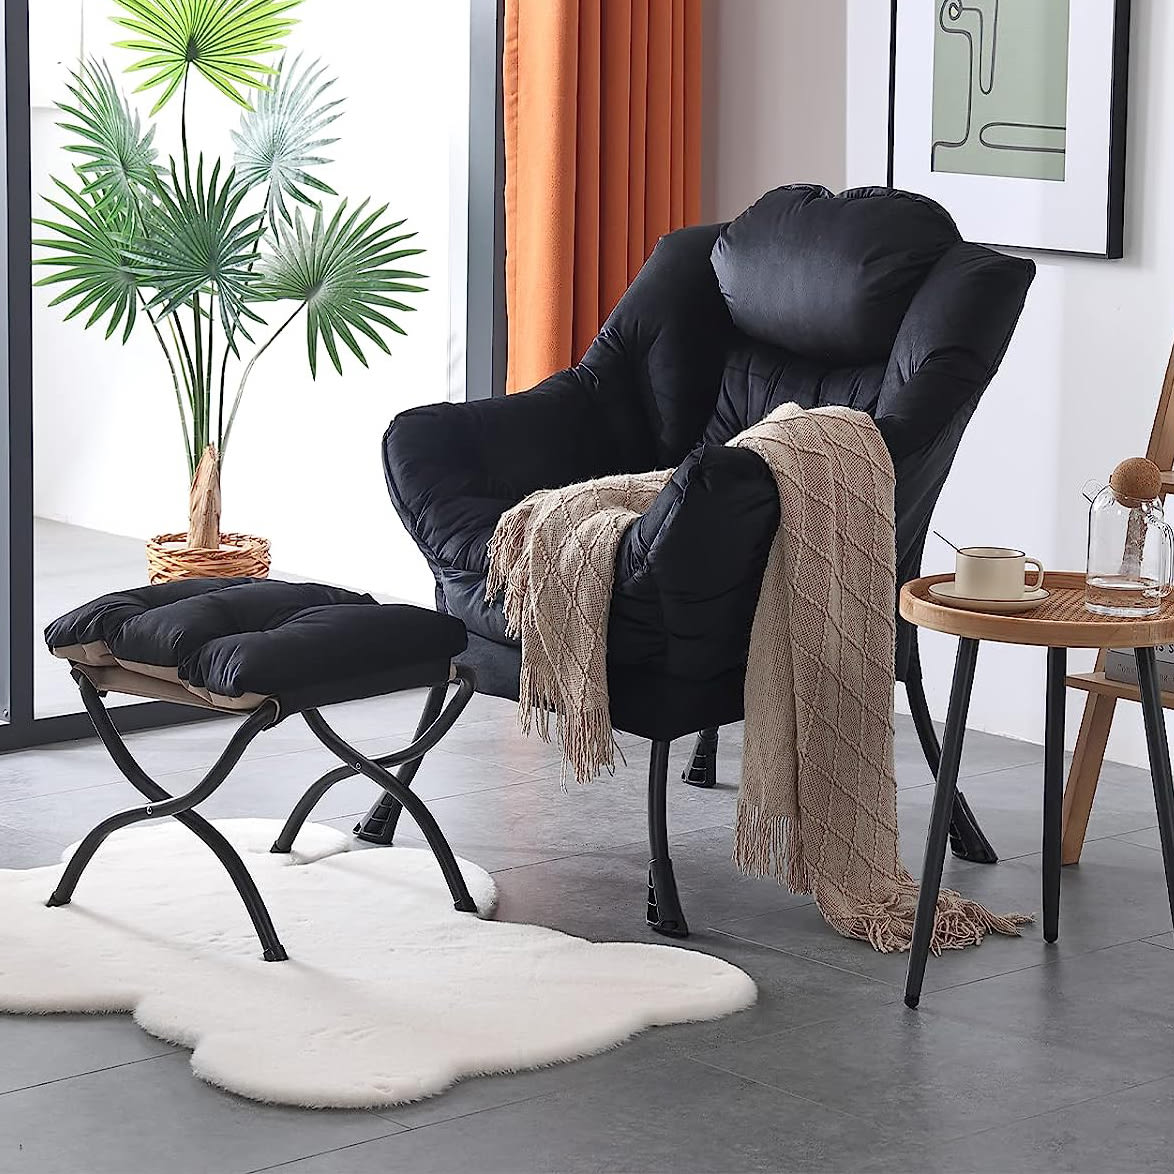 http://cdn.apartmenttherapy.info/image/upload/v1687366938/commerce/product-roundups/2023/2023-06-comfortable-chairs-small-spaces/welnow-lazy-chair-ottoman.jpg